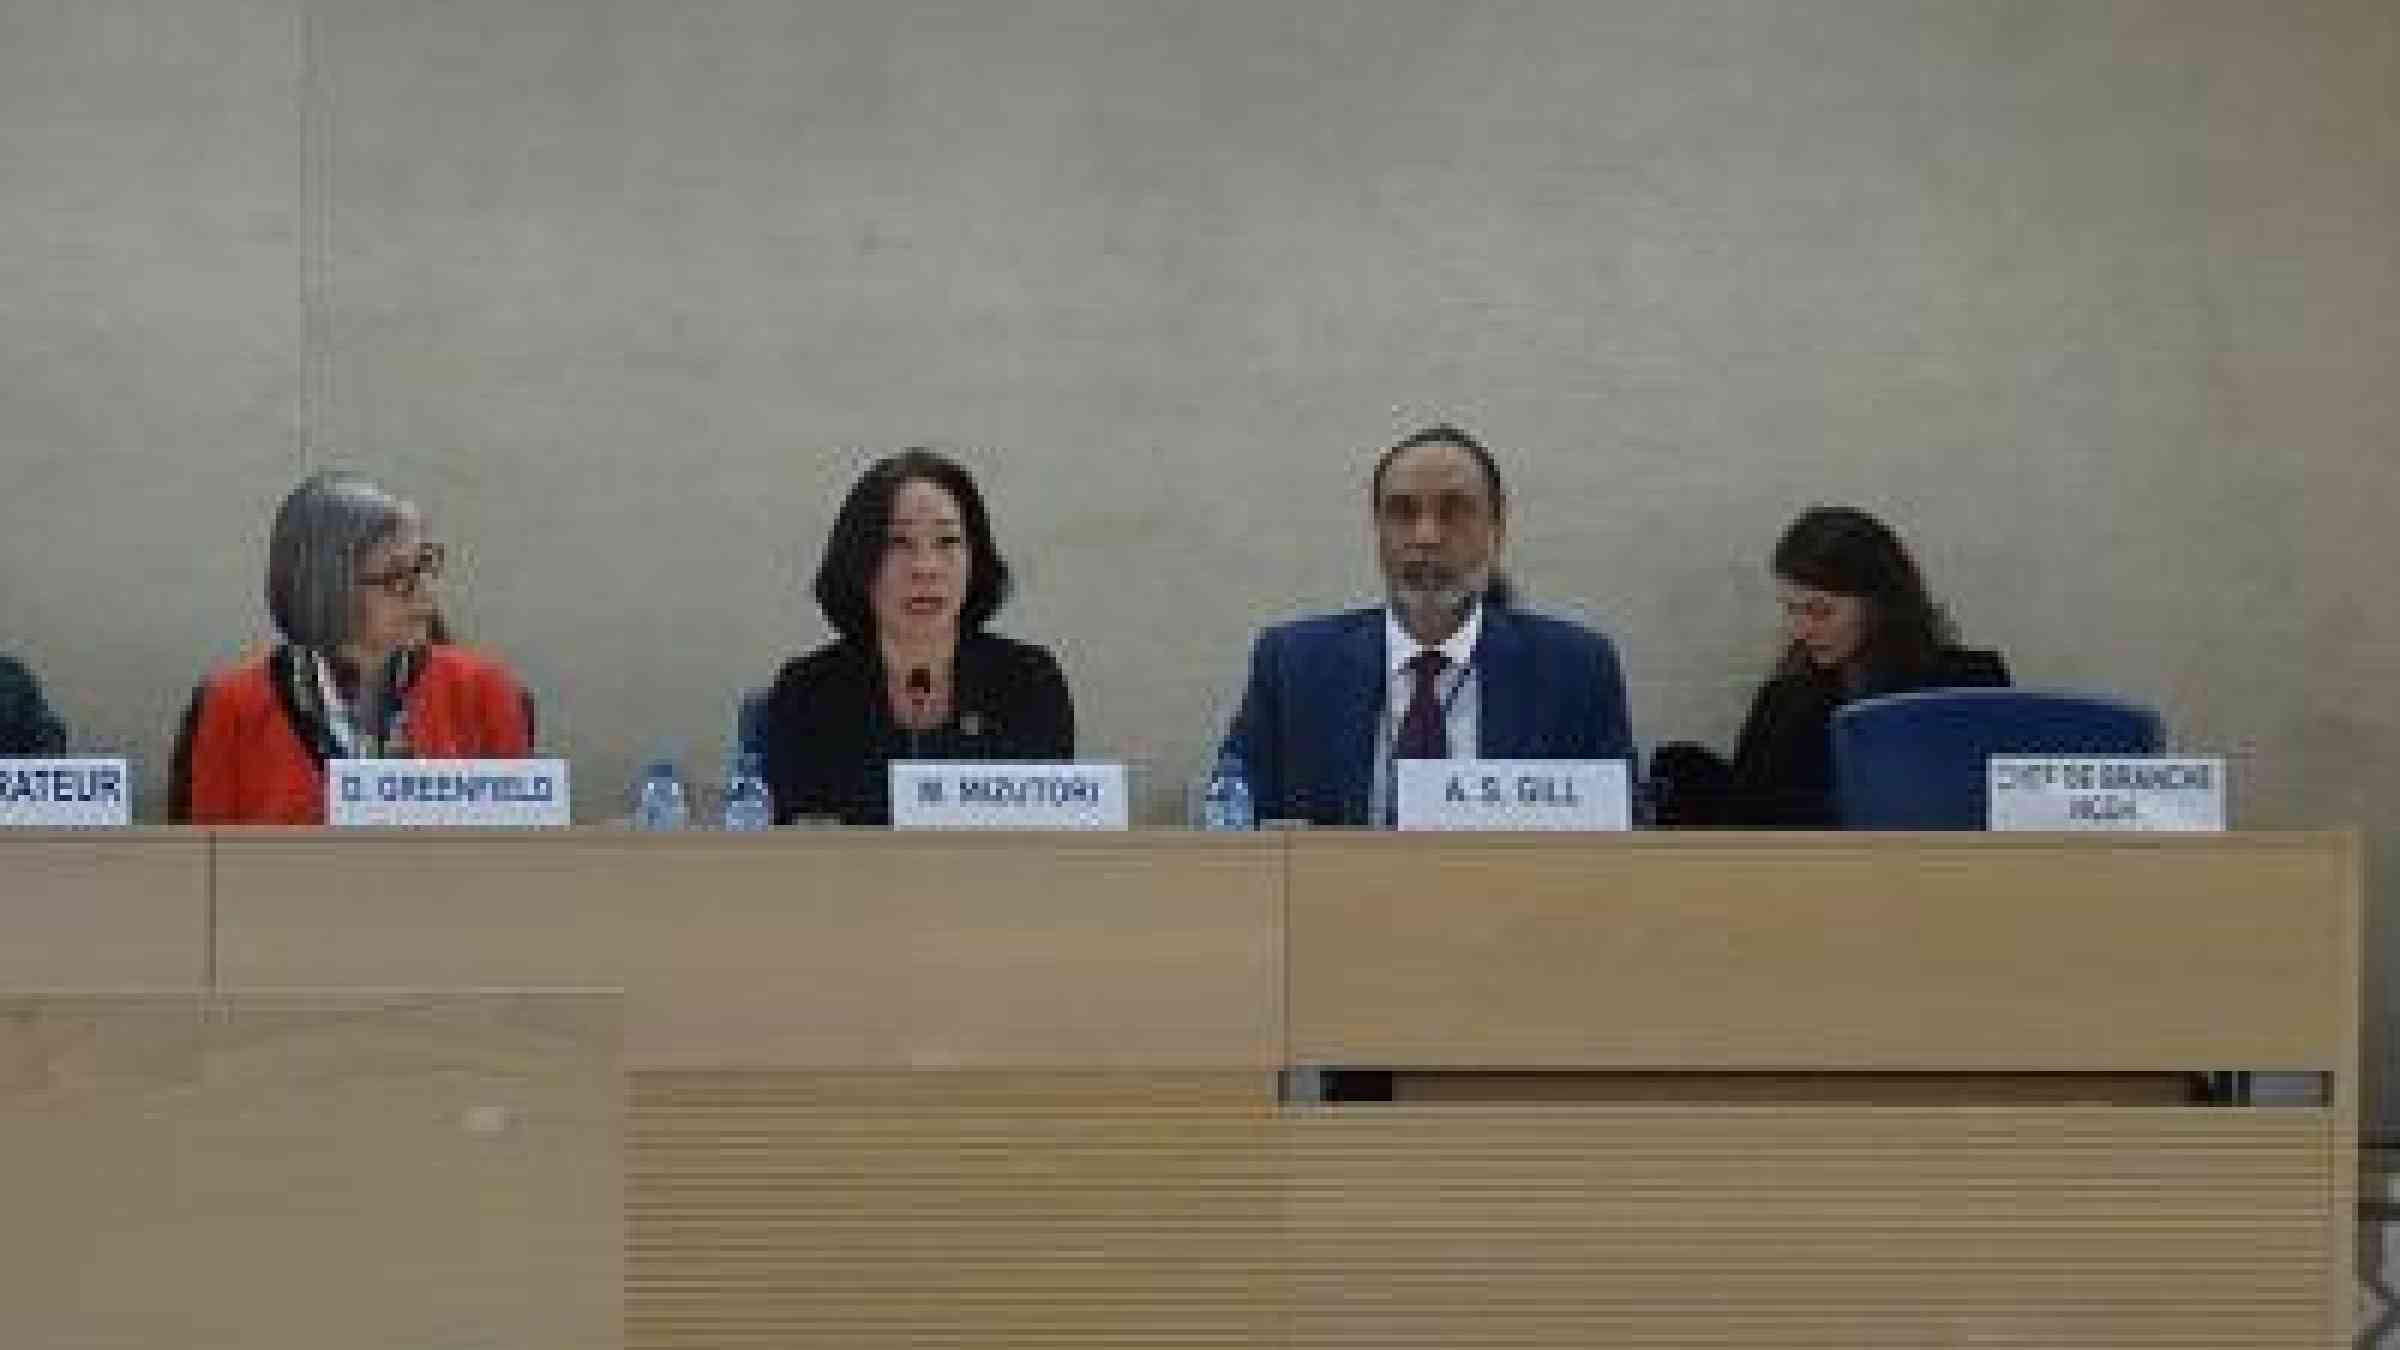 UNISDR chief, Mami Mizutori, speaking at the Human Rights Council